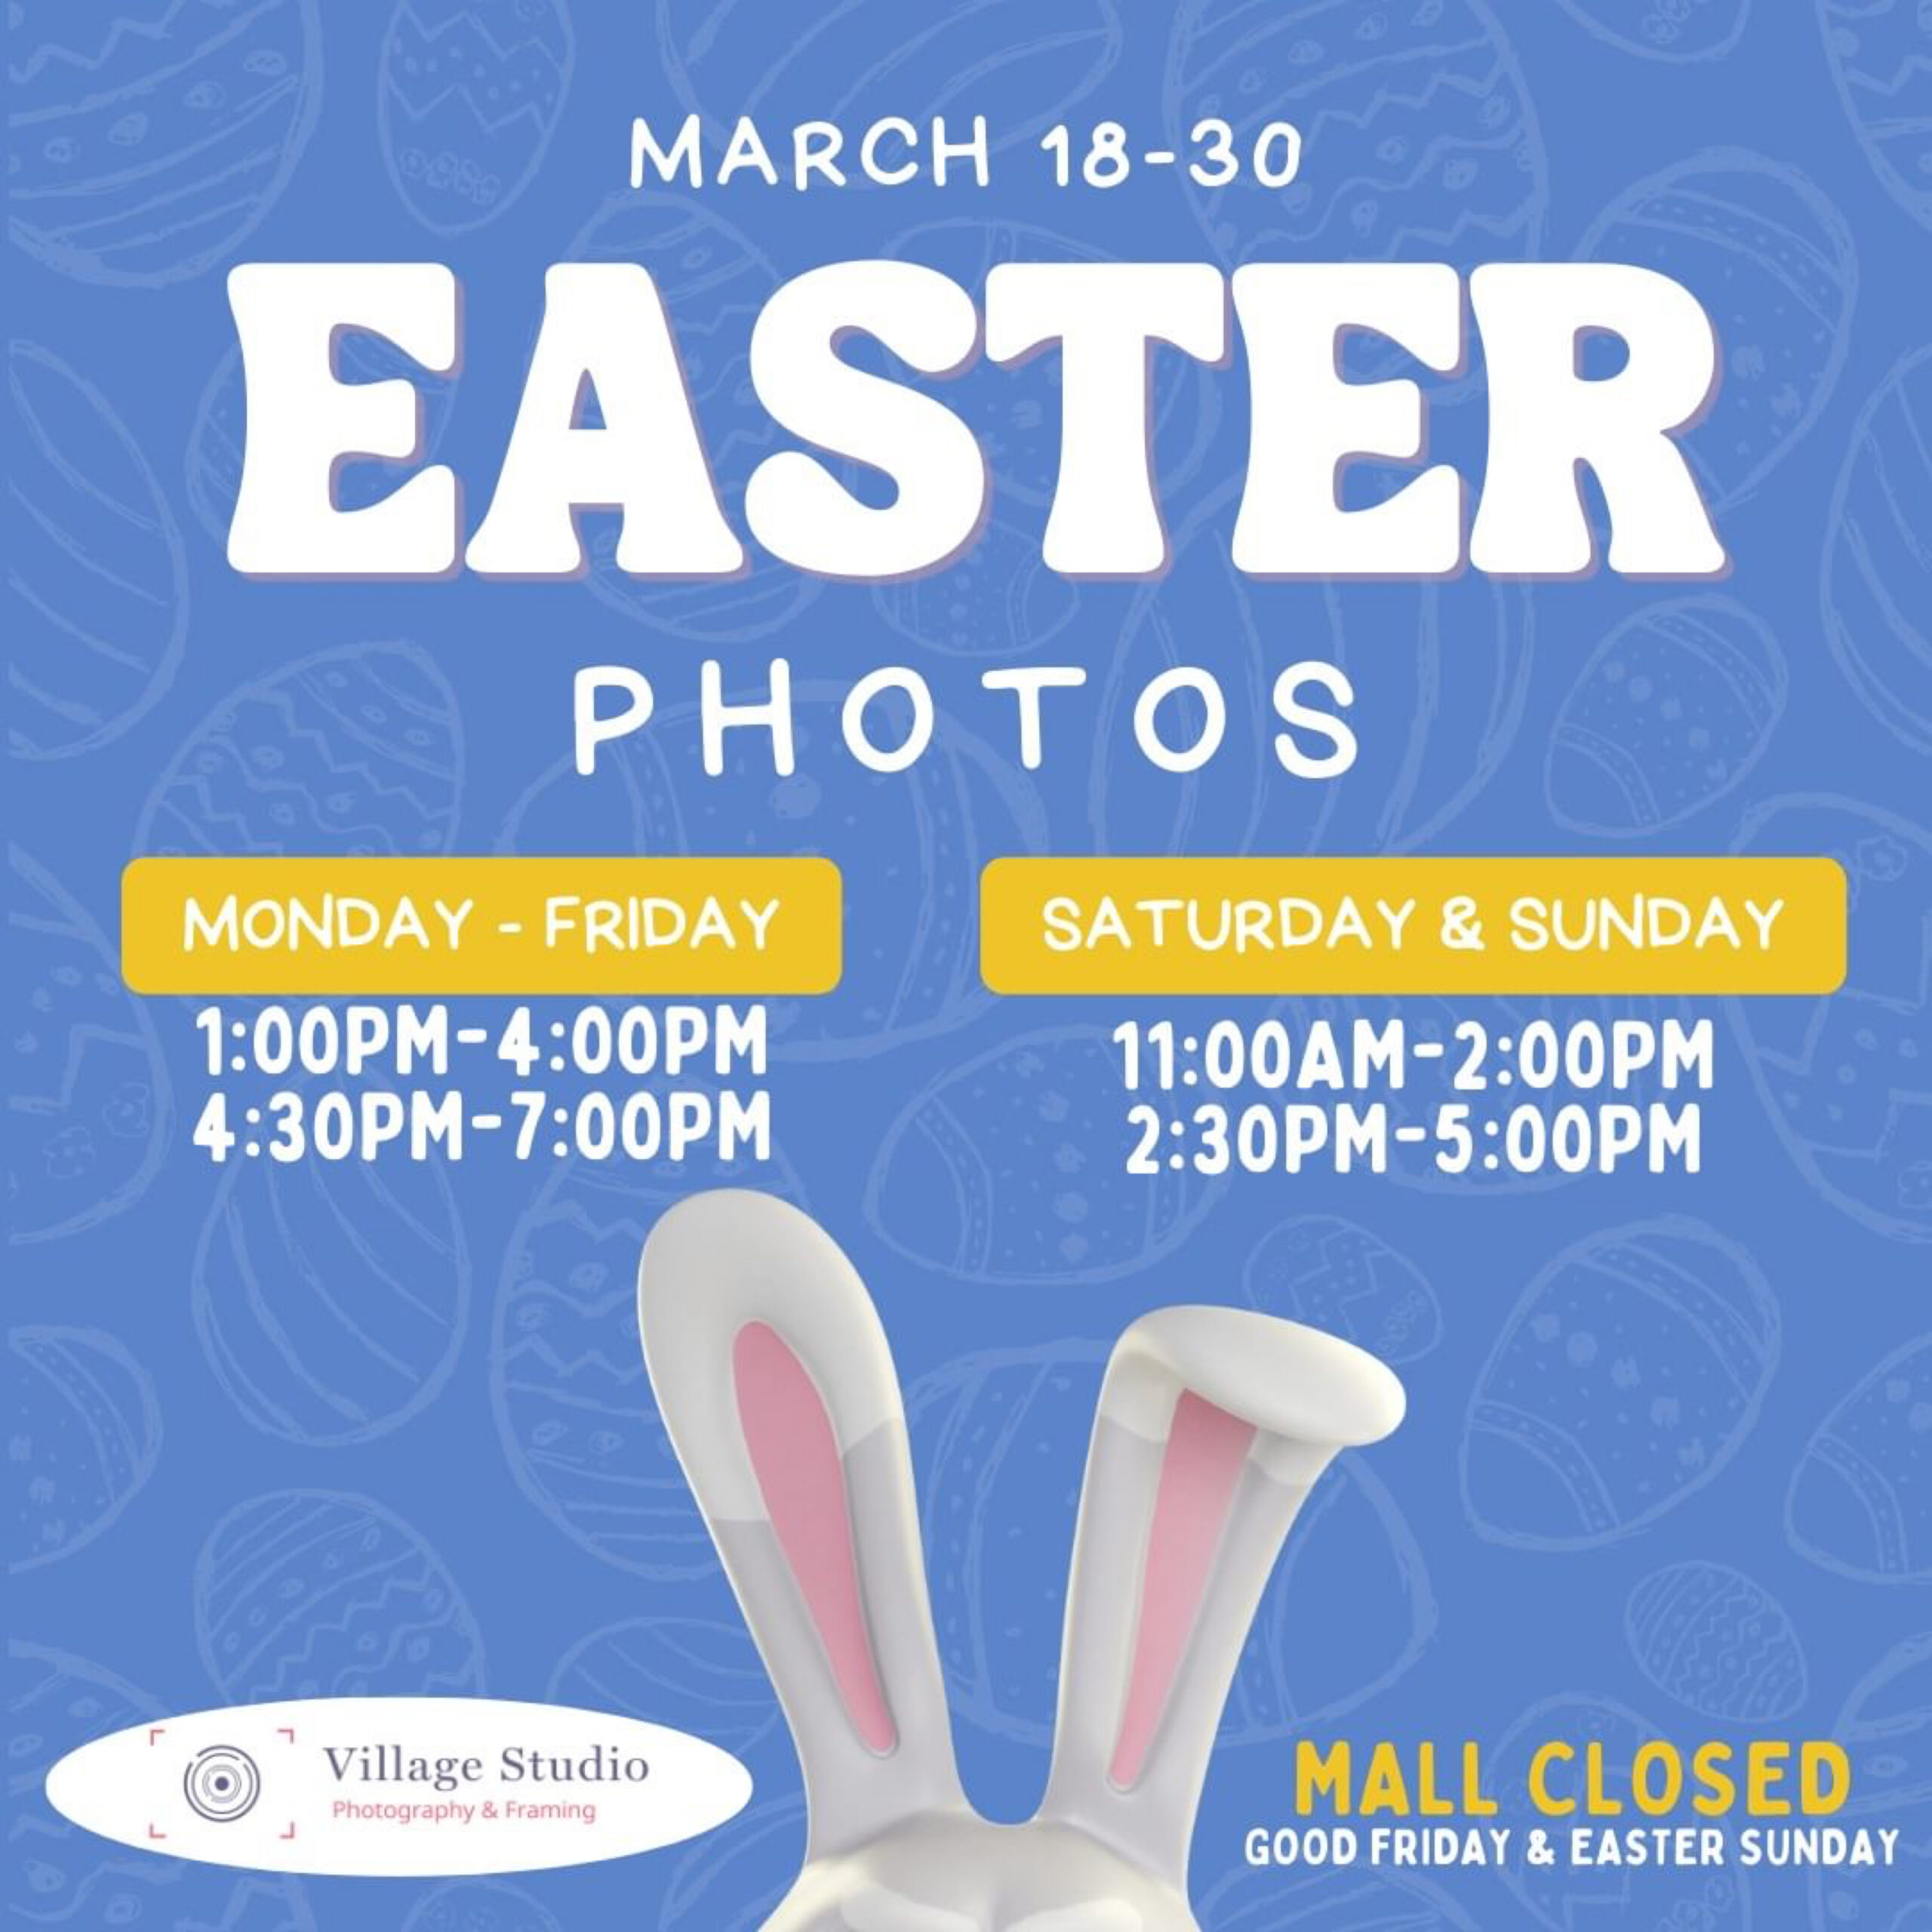 Easter Photos at the Seaway Mall